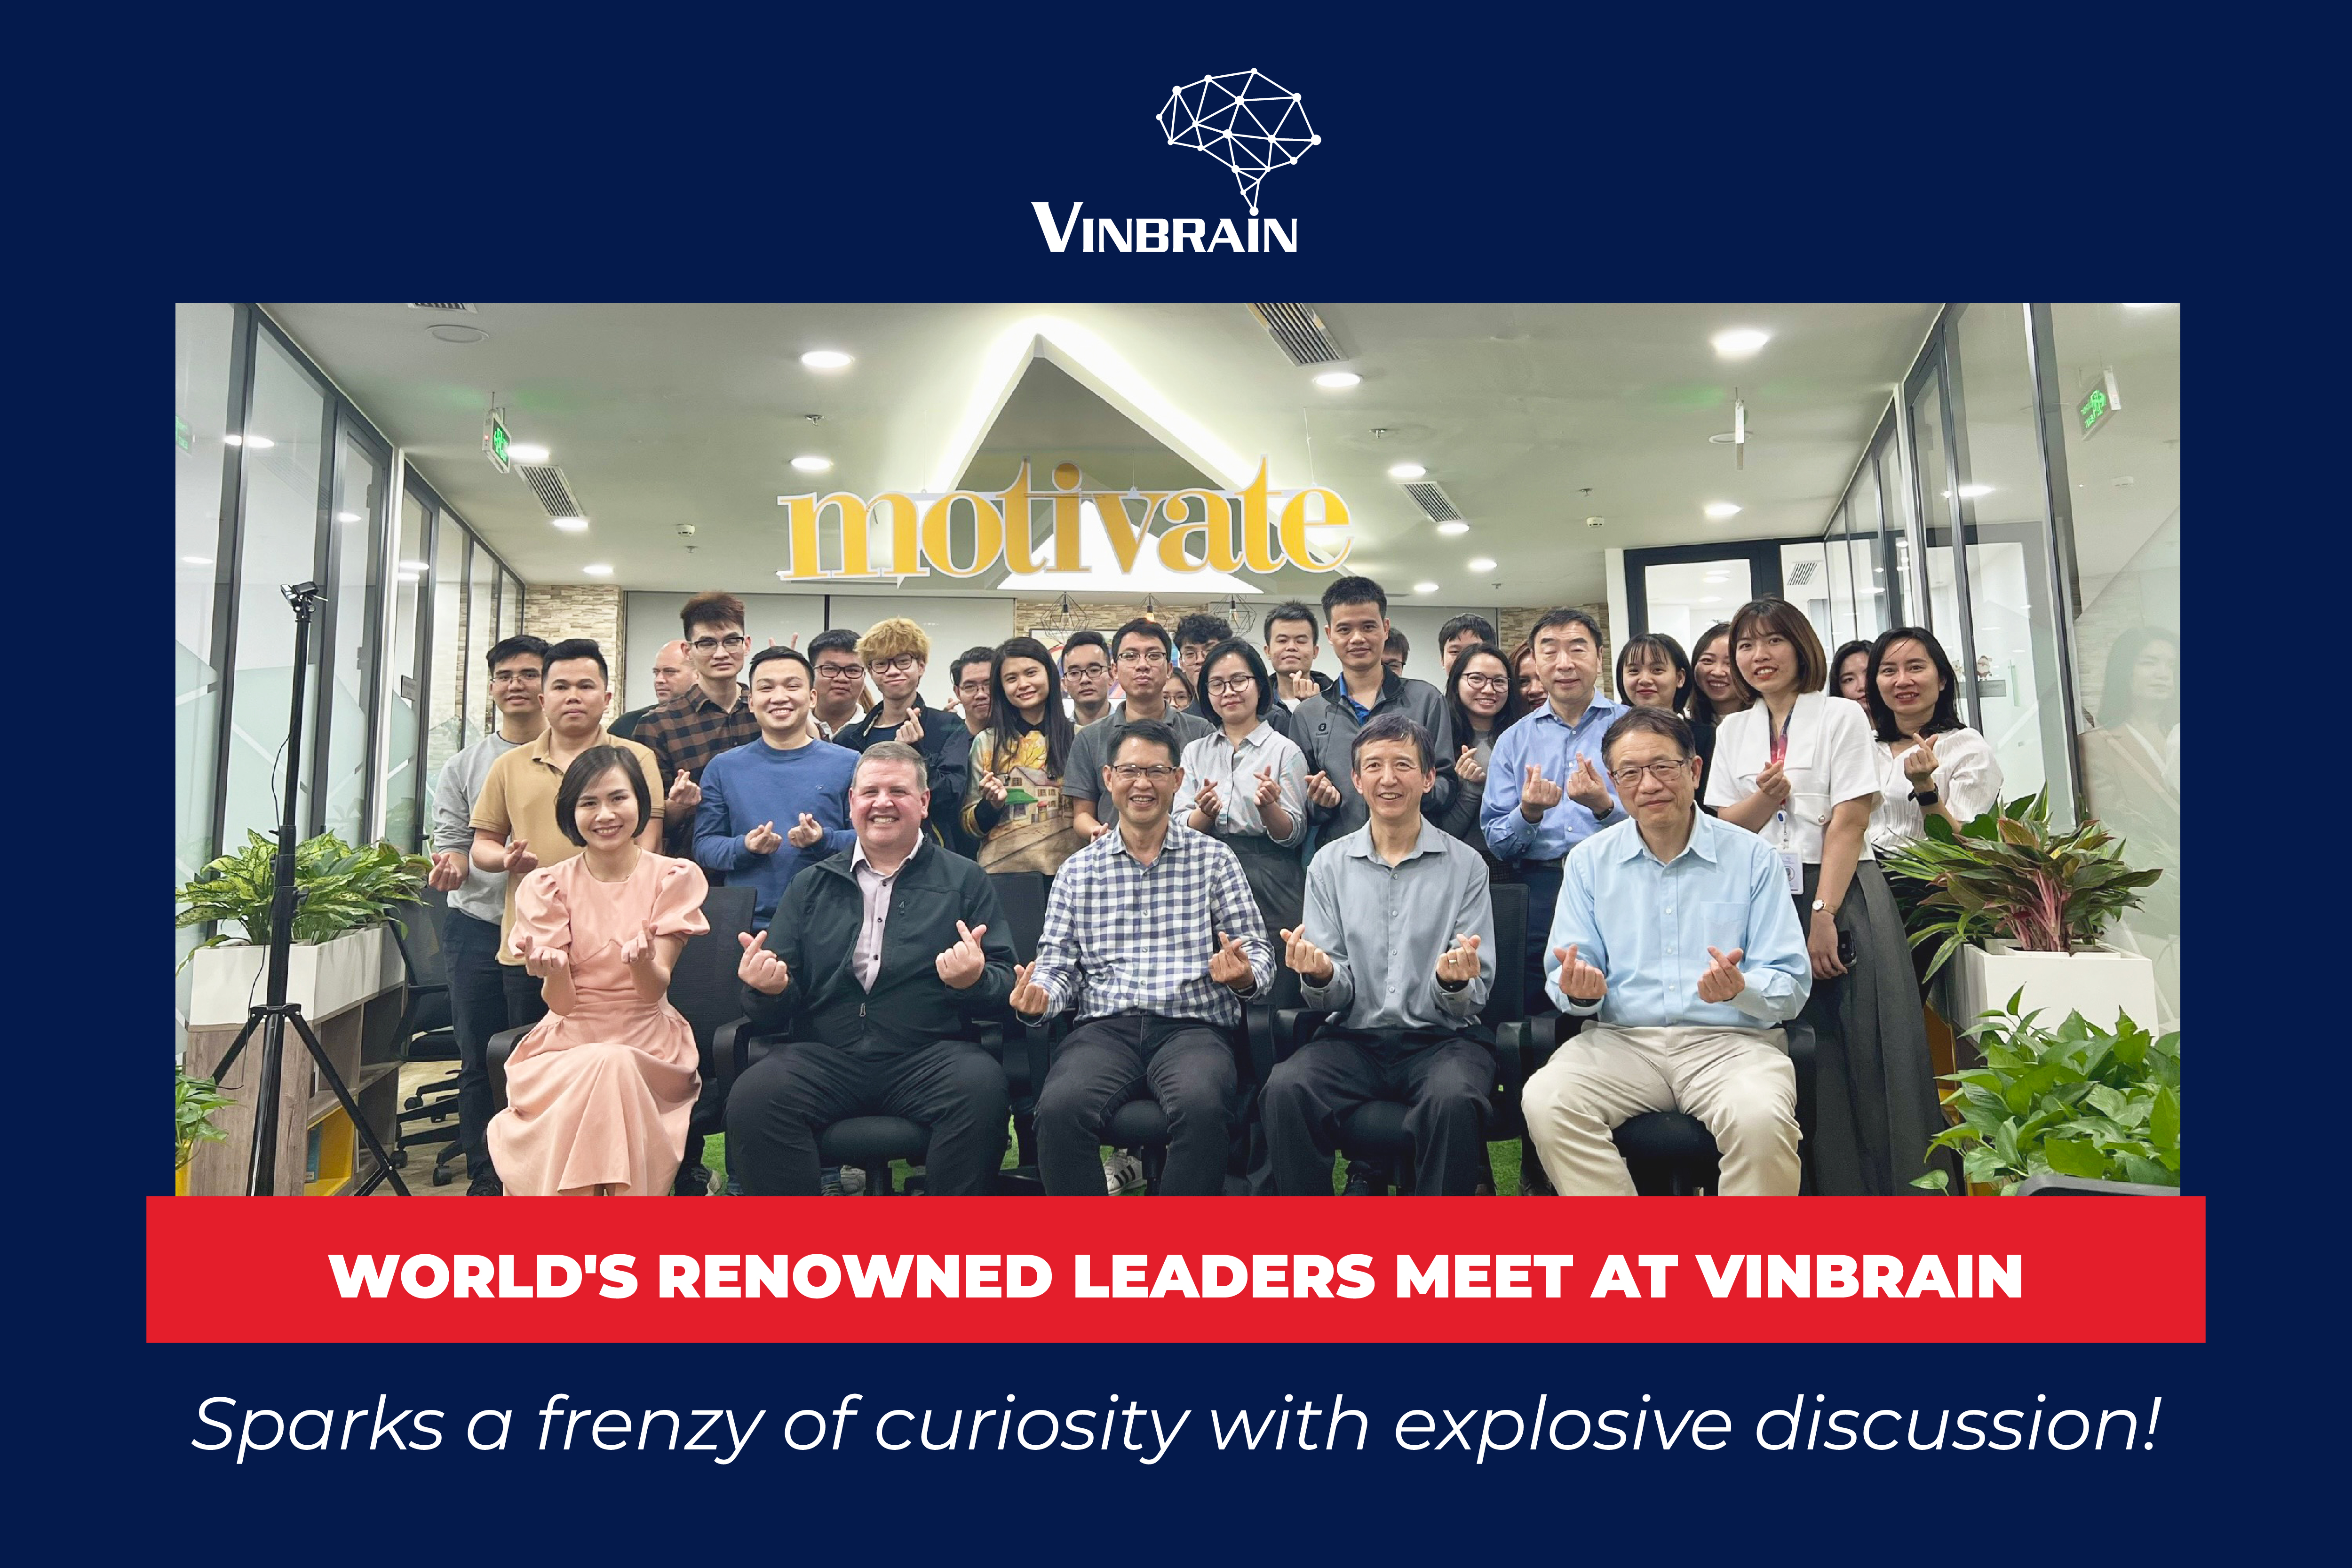 VINBRAIN HOSTED AN UNPRECEDENTED TALK OF TWO WORLD RENOWNED EXECUTIVE LEADERS IN MEDICAL TECHNOLOGY AND R&D     